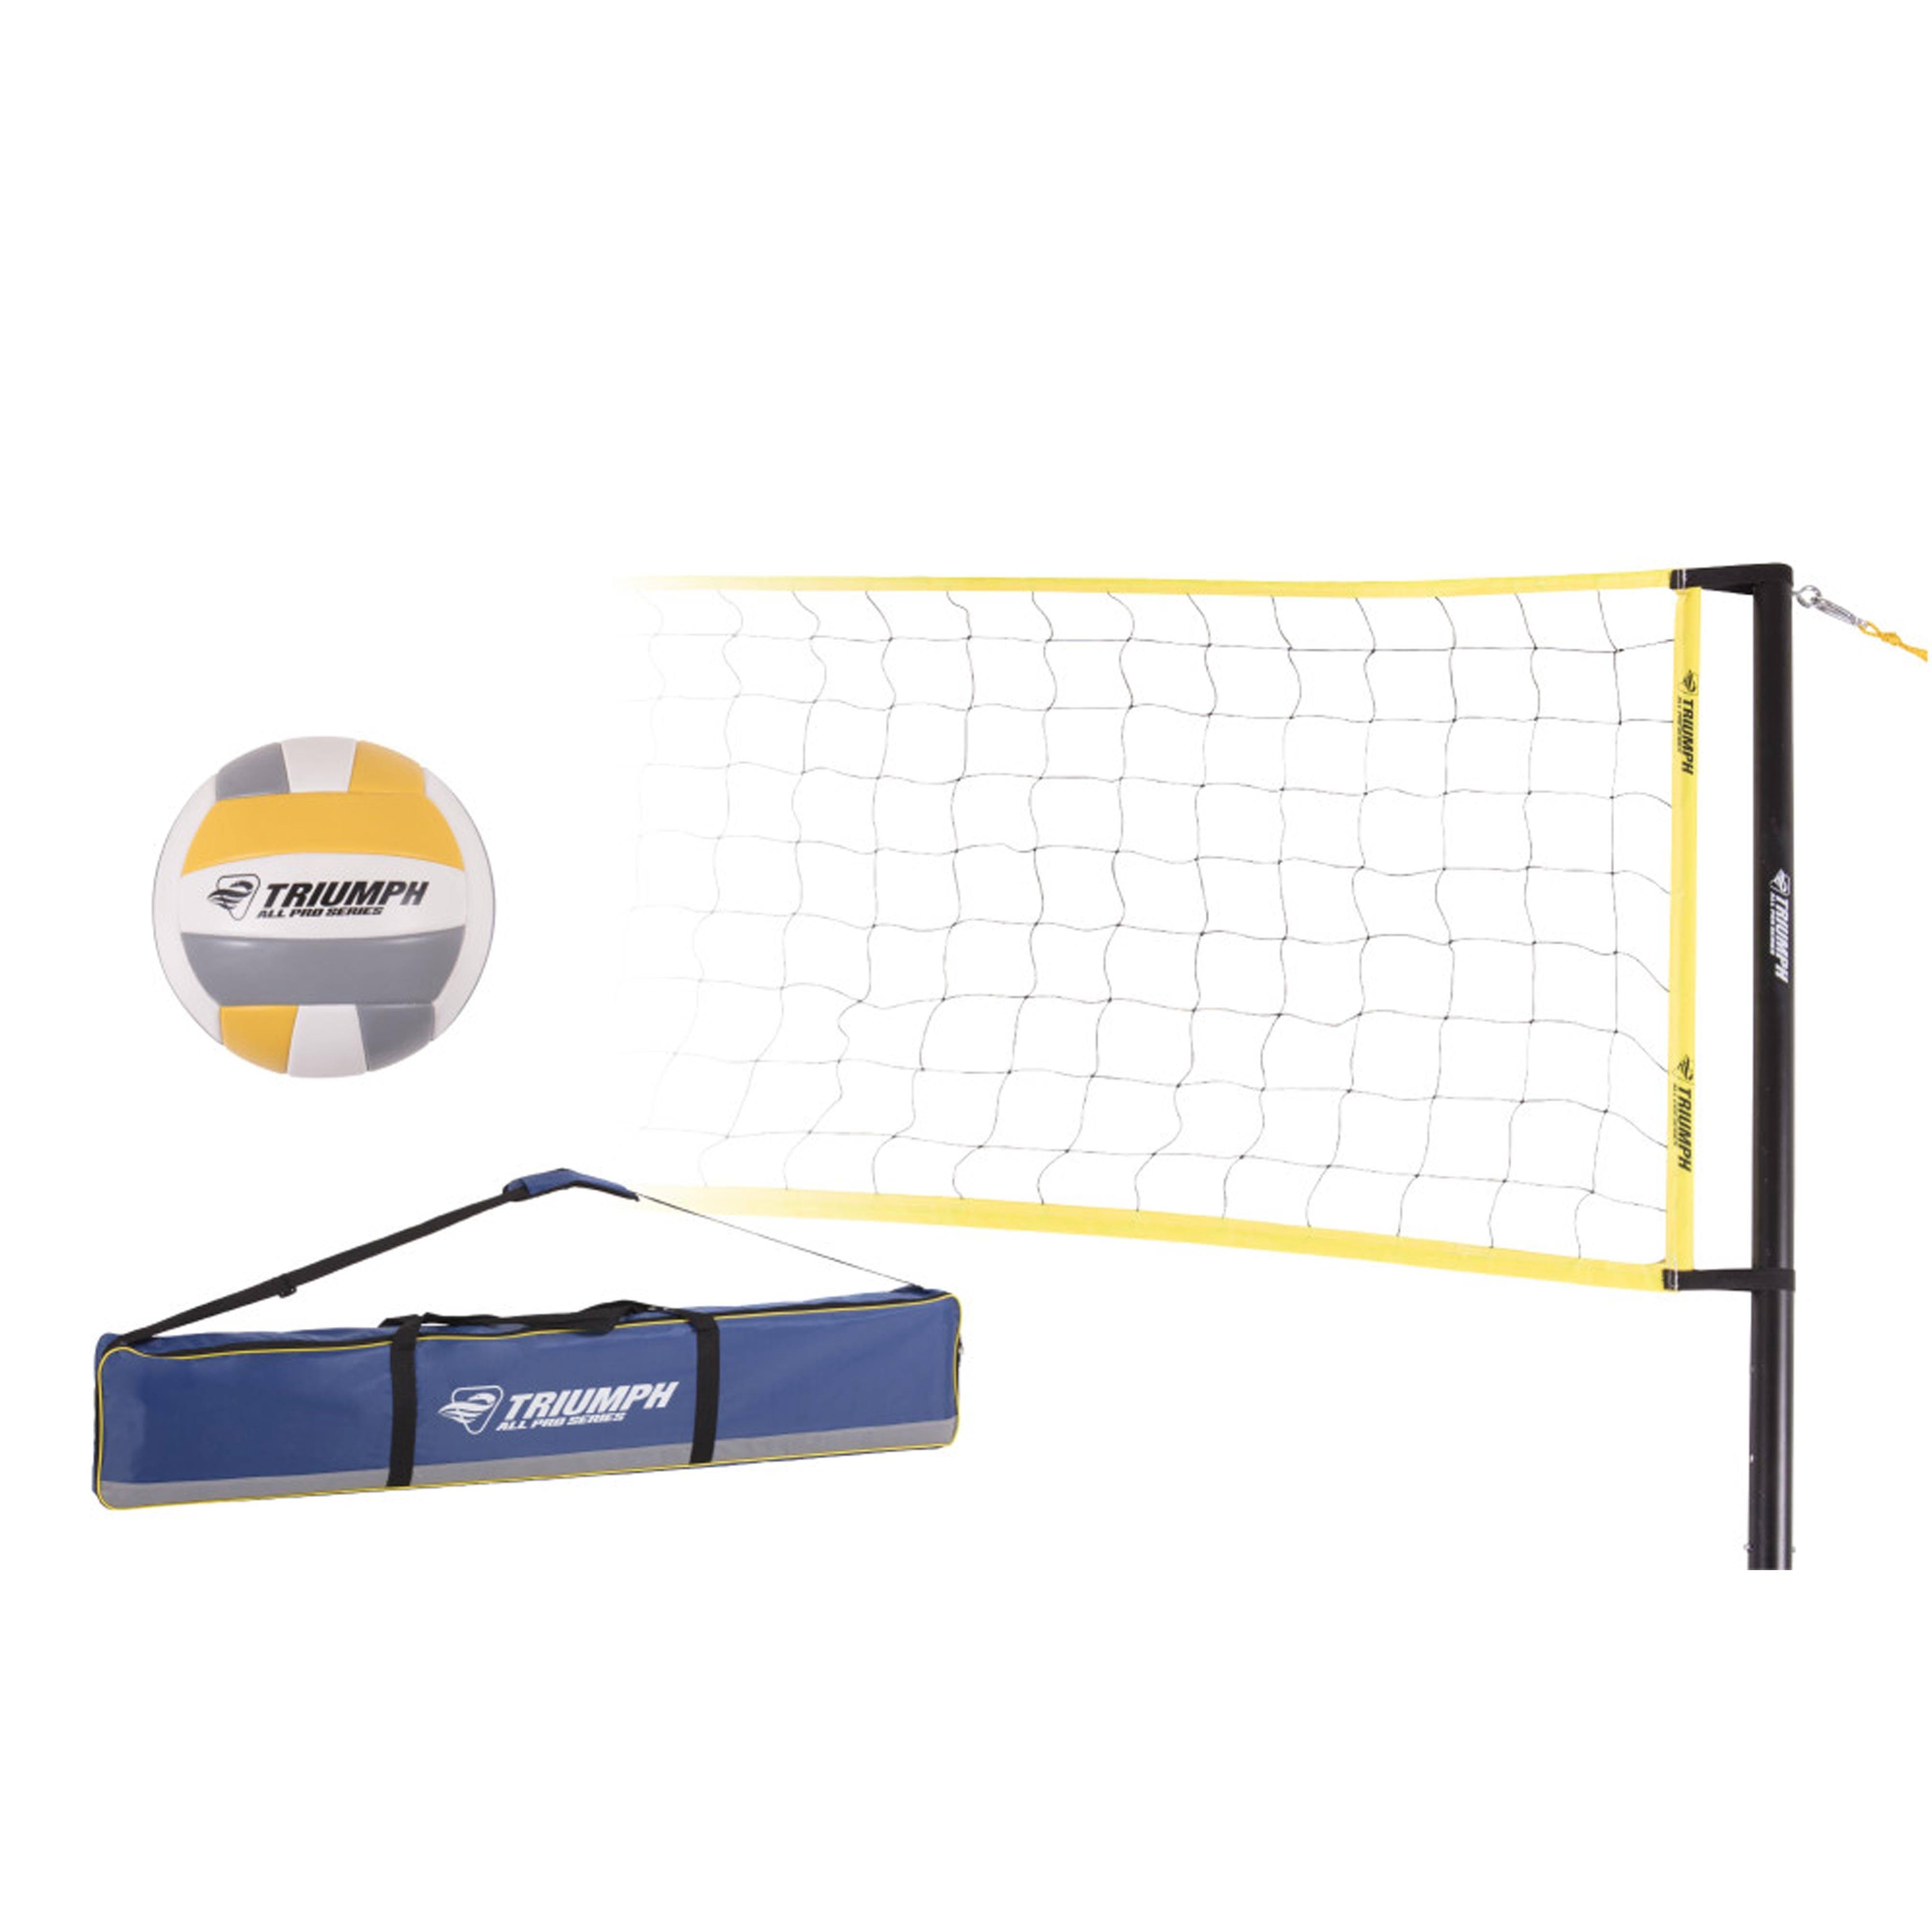 Triumph Competition Portable Volleyball Set with Padded Shoulder Bag | Image